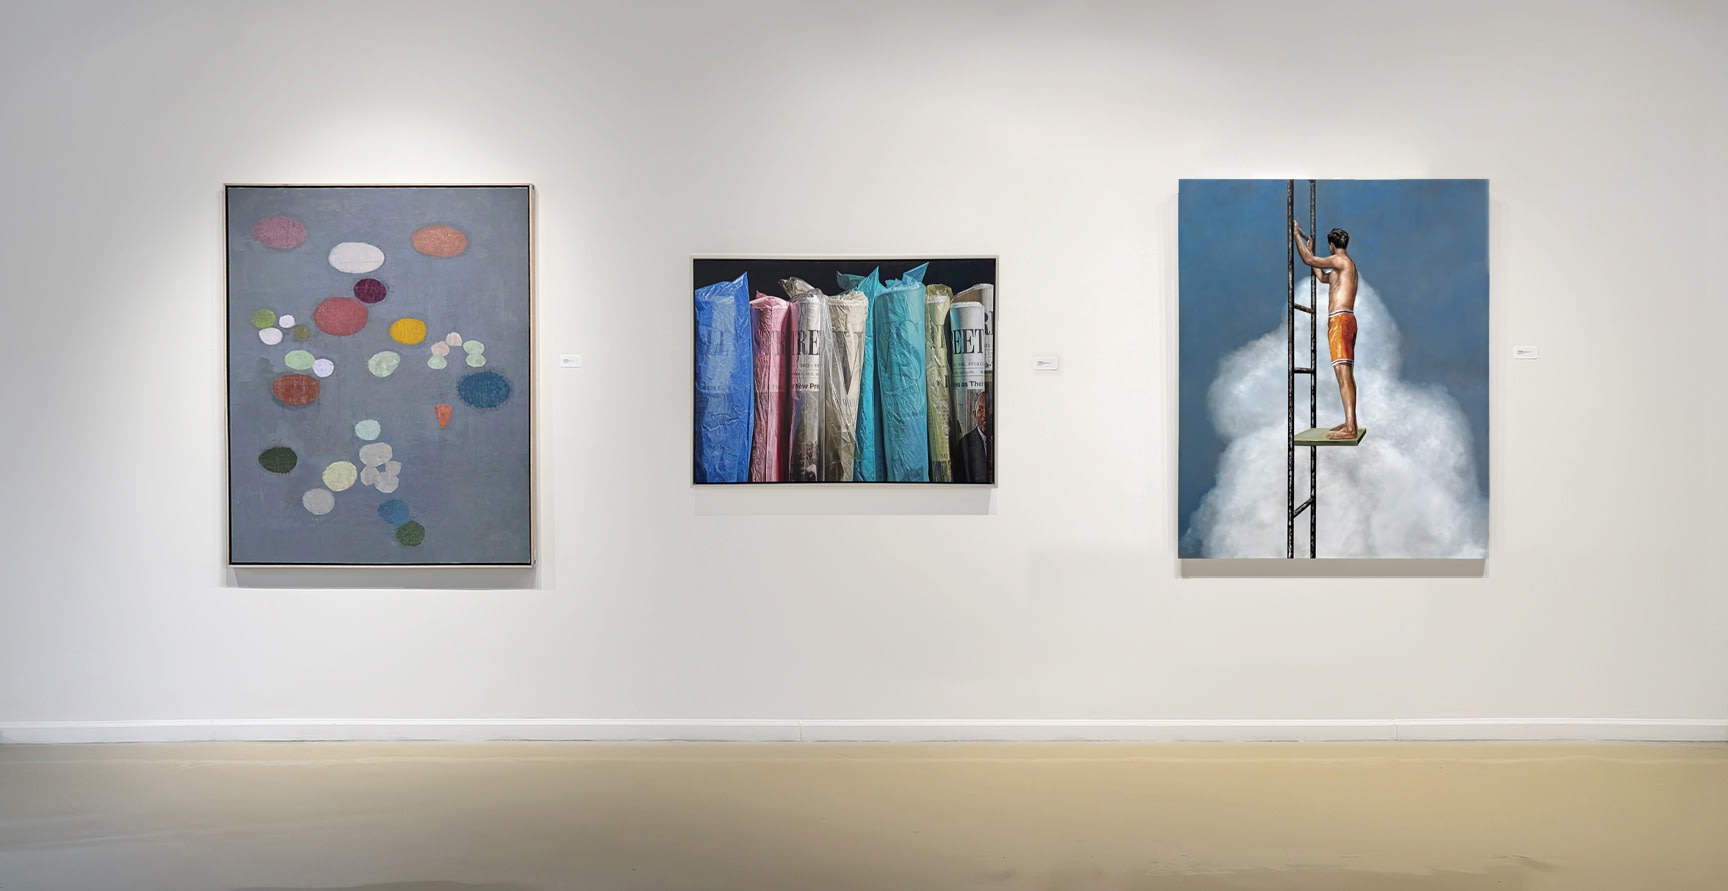 installation view gallery interior with three paintings